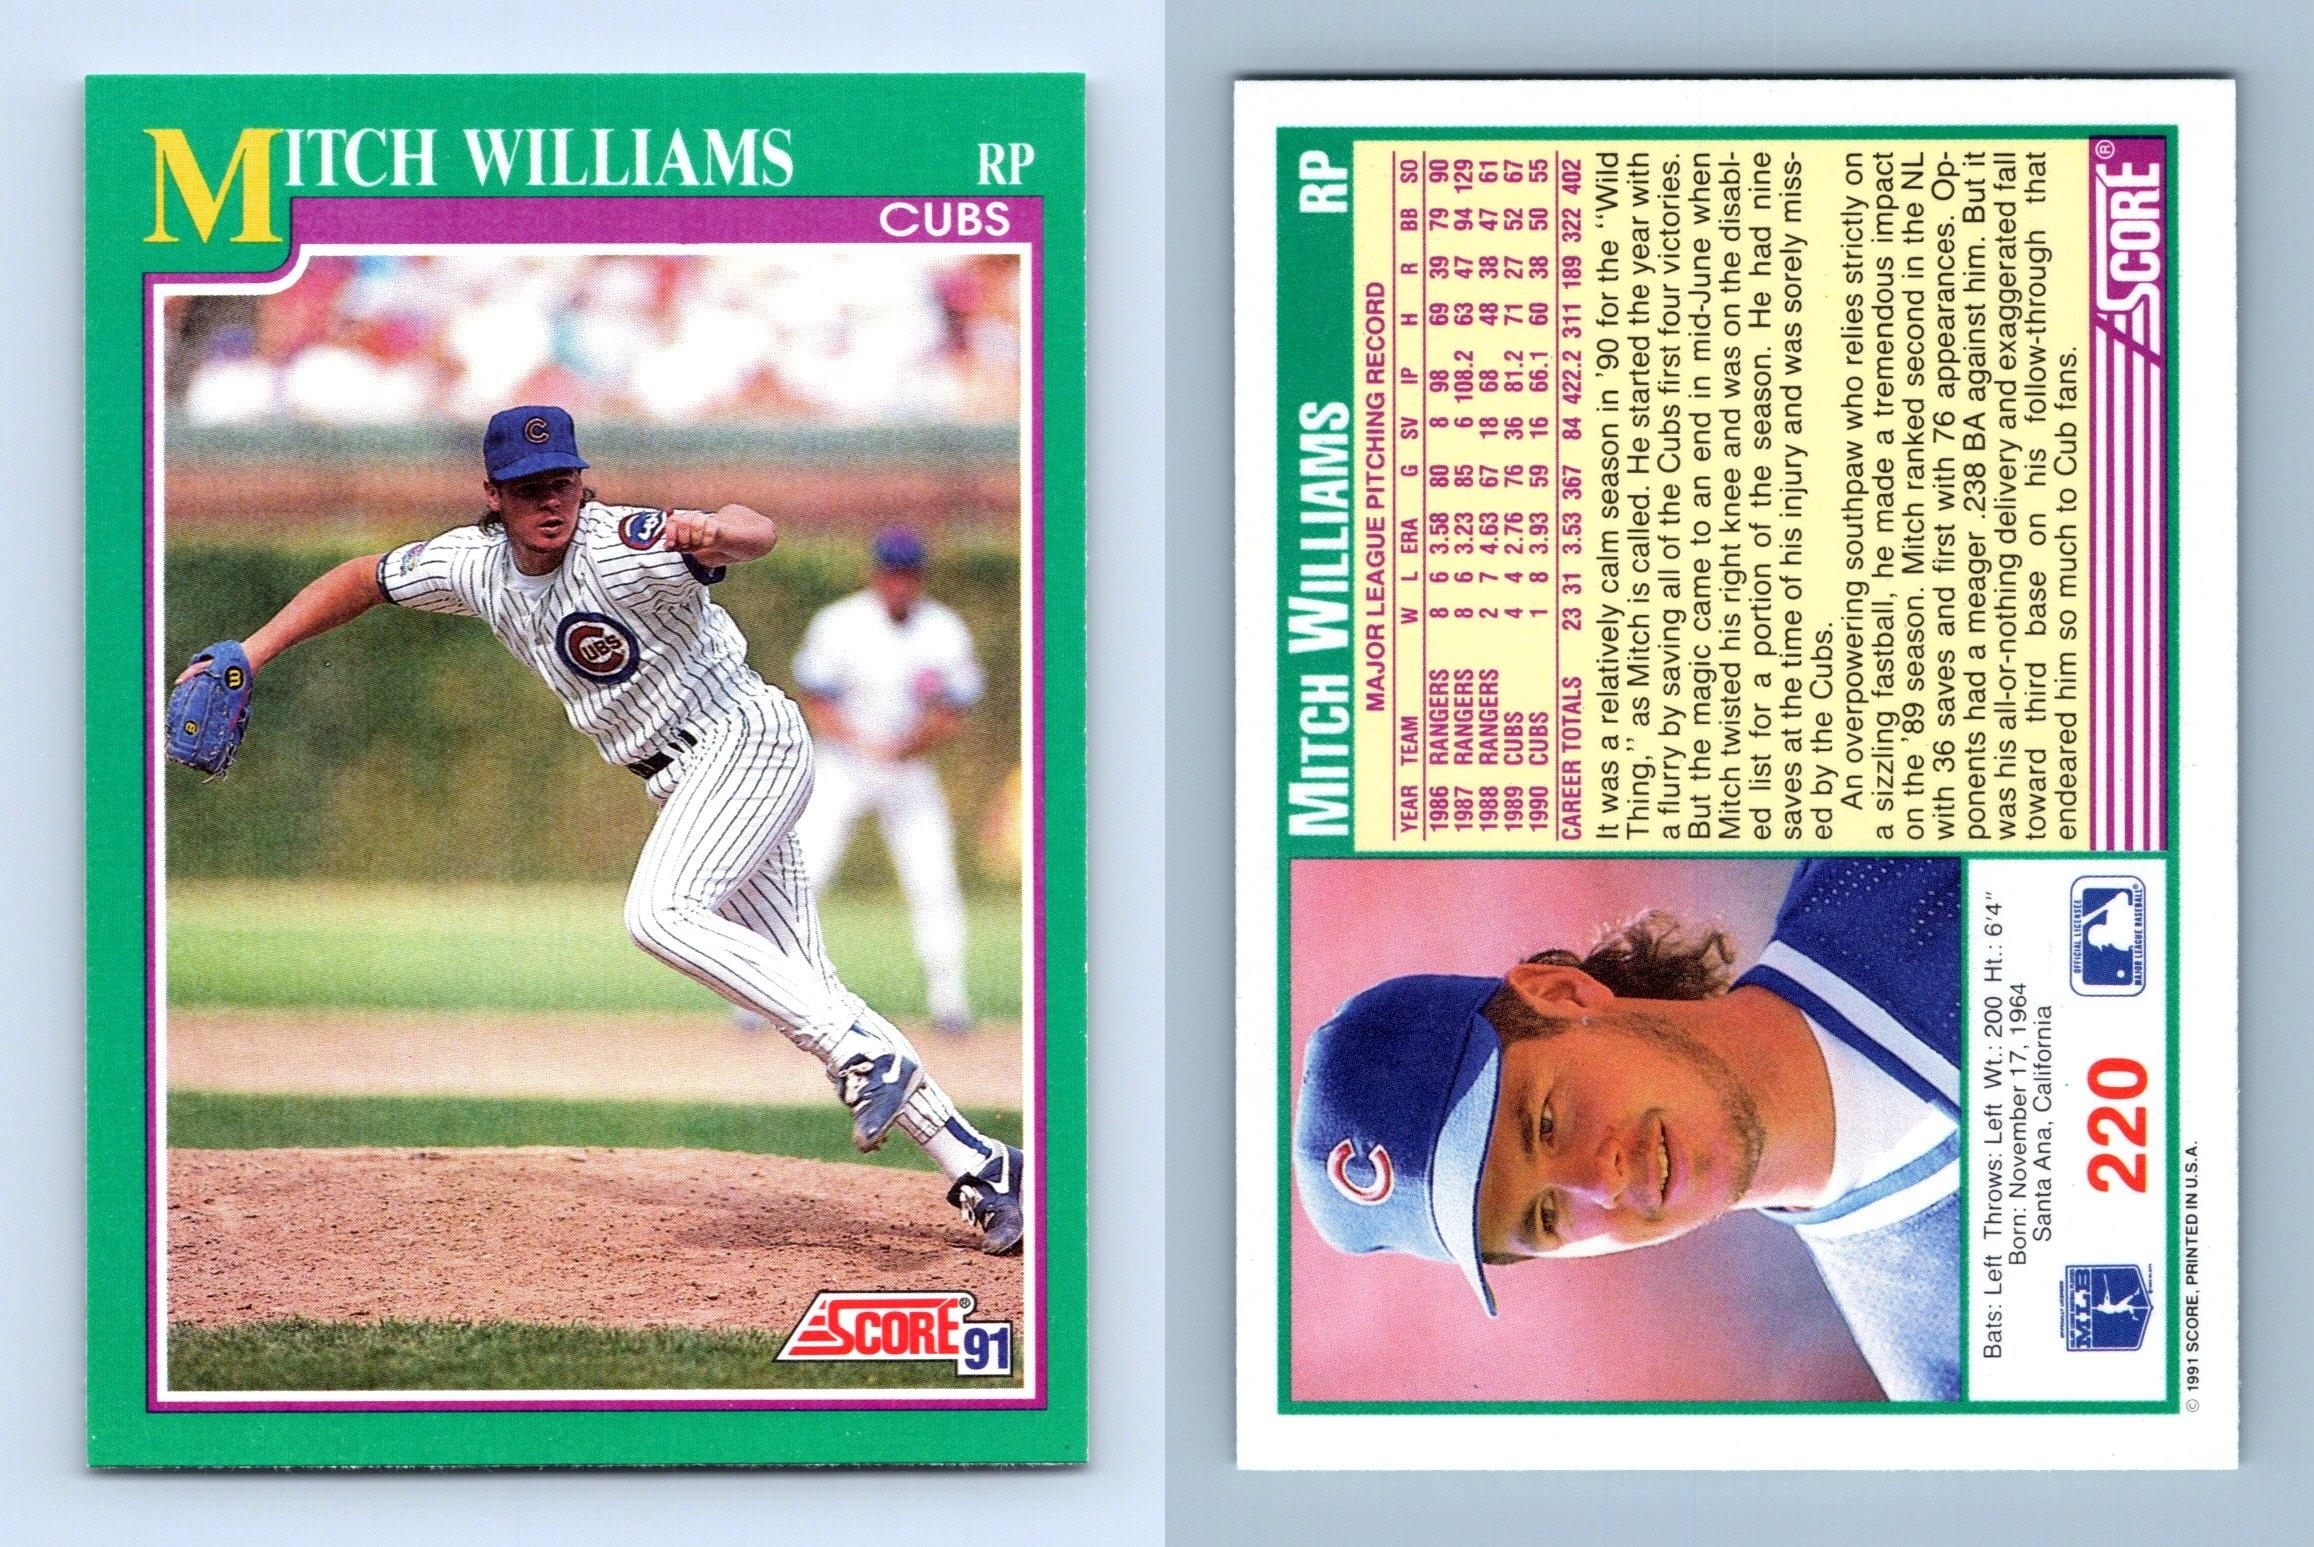 Mitch Williams autographed baseball card (Chicago Cubs)